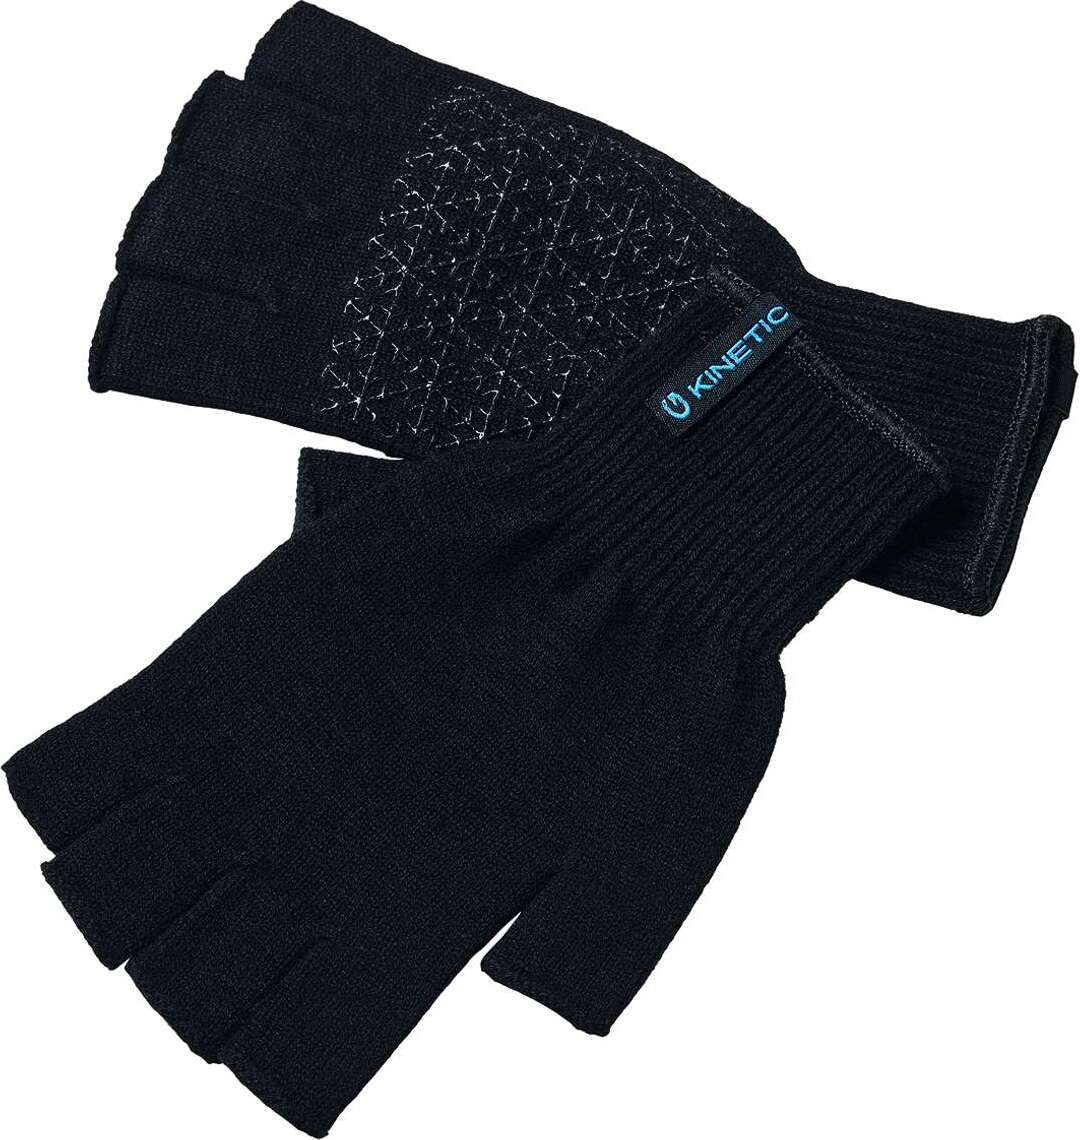 Kinetic Merino Wool Half Finger Glove One Size Black – Glasgow Angling  Centre